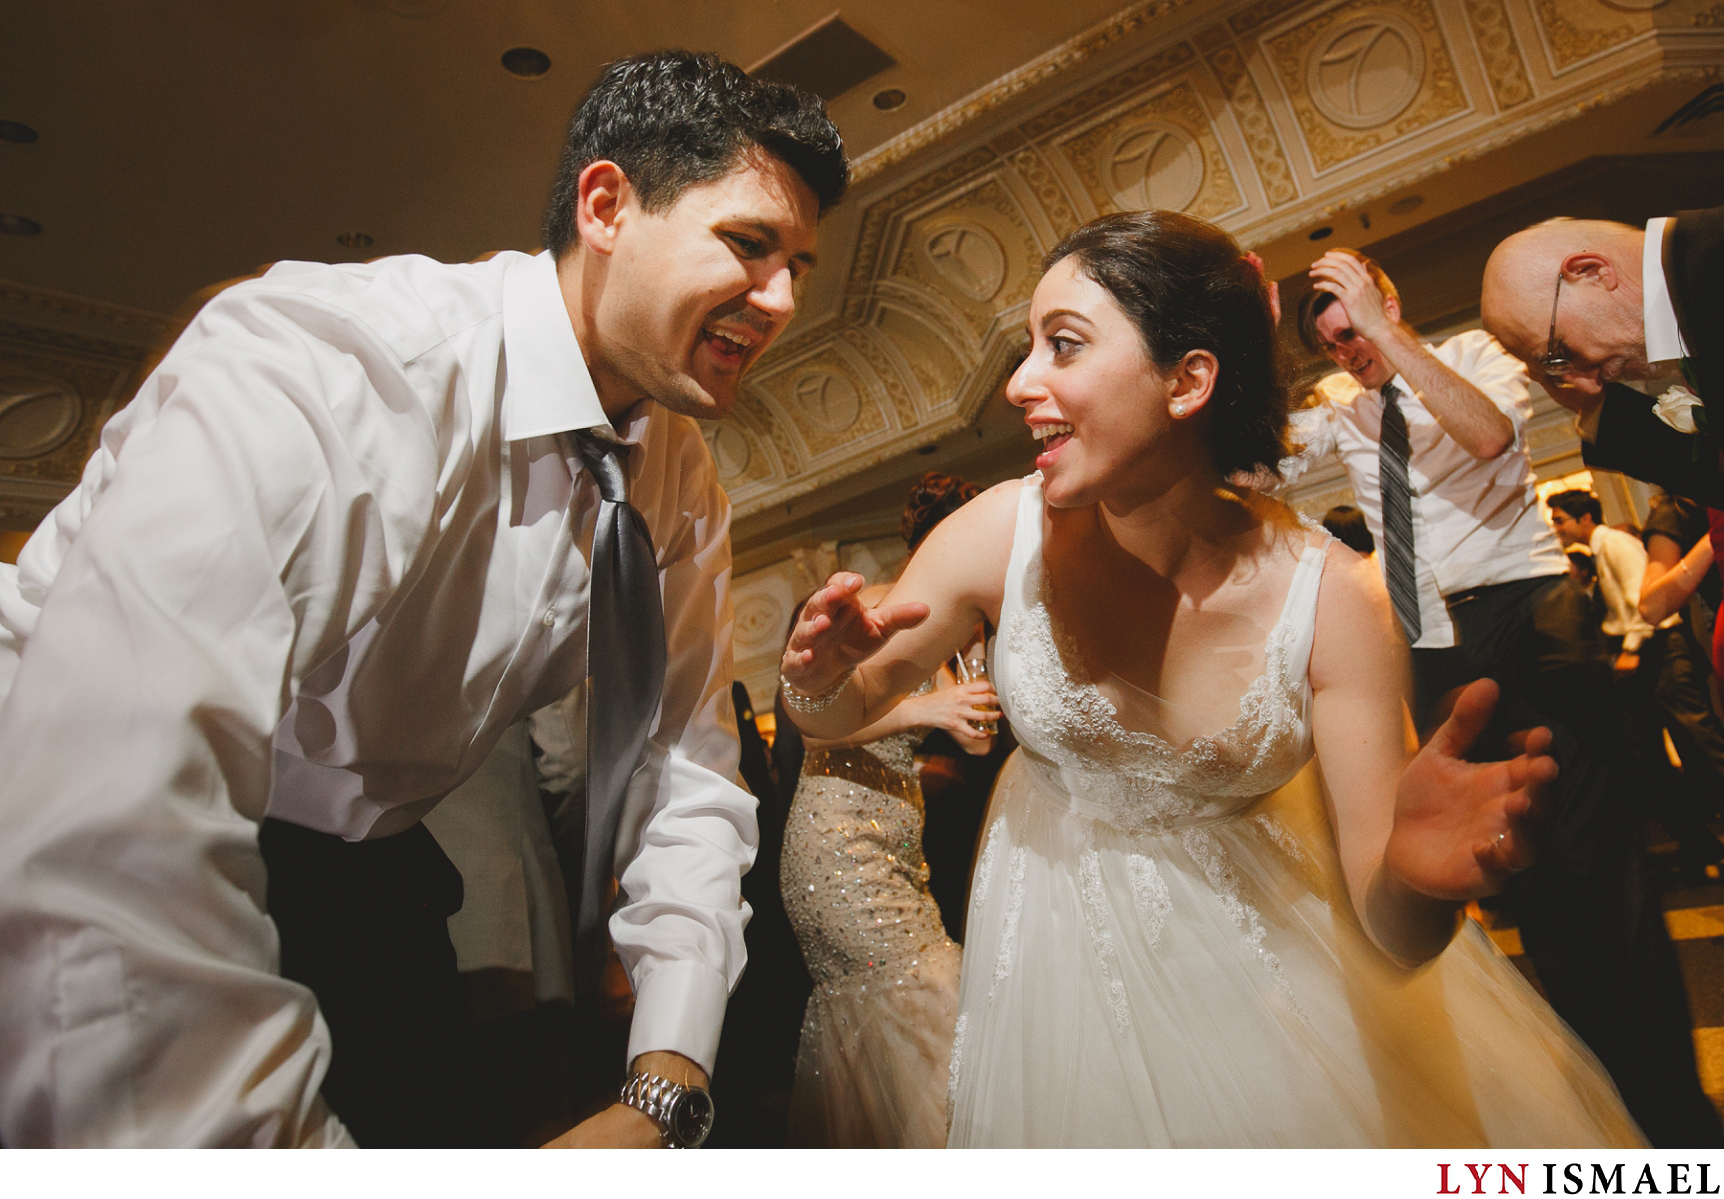 Bride and her brother-in-law dancing to the popular song by Pharell, Happy, at a wedding reception in Paradise Banquet Hall in Vaughan, Ontario.